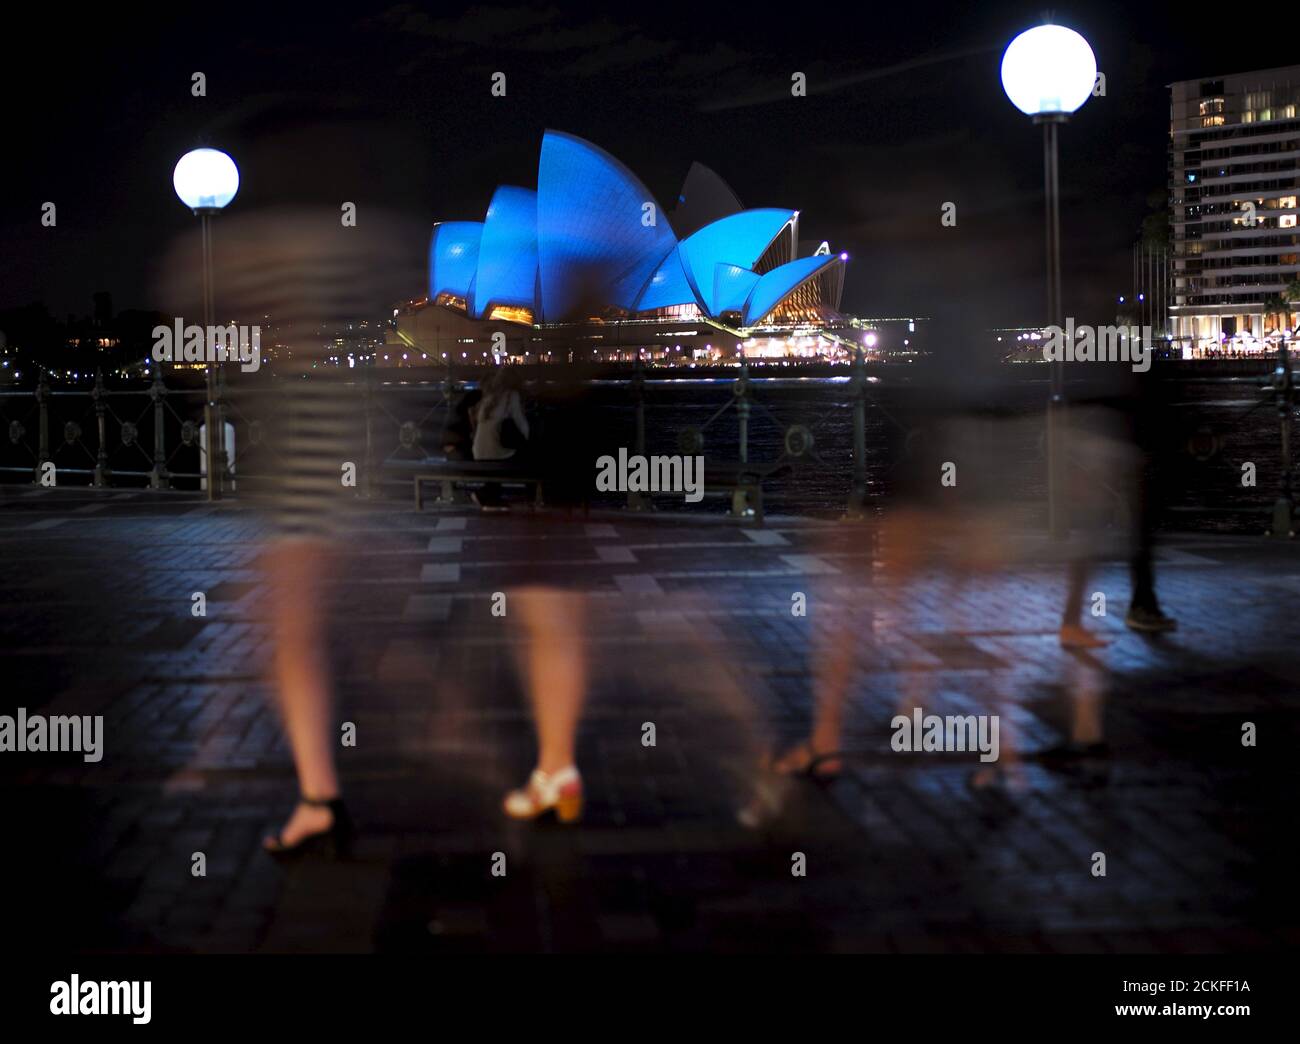 A group of women visiting Sydney's waterfront walk past the Sydney Opera House illuminated in a shade of blue October 24, 2015. Around 200 iconic monuments, buildings, museums, bridges and other landmarks in nearly 60 countries including Australia's architectural icon, will be lit up blue, the official colour of the United Nations, as part of a global campaign to commemorate its 70th anniversary.  REUTERS/Jason Reed Stock Photo